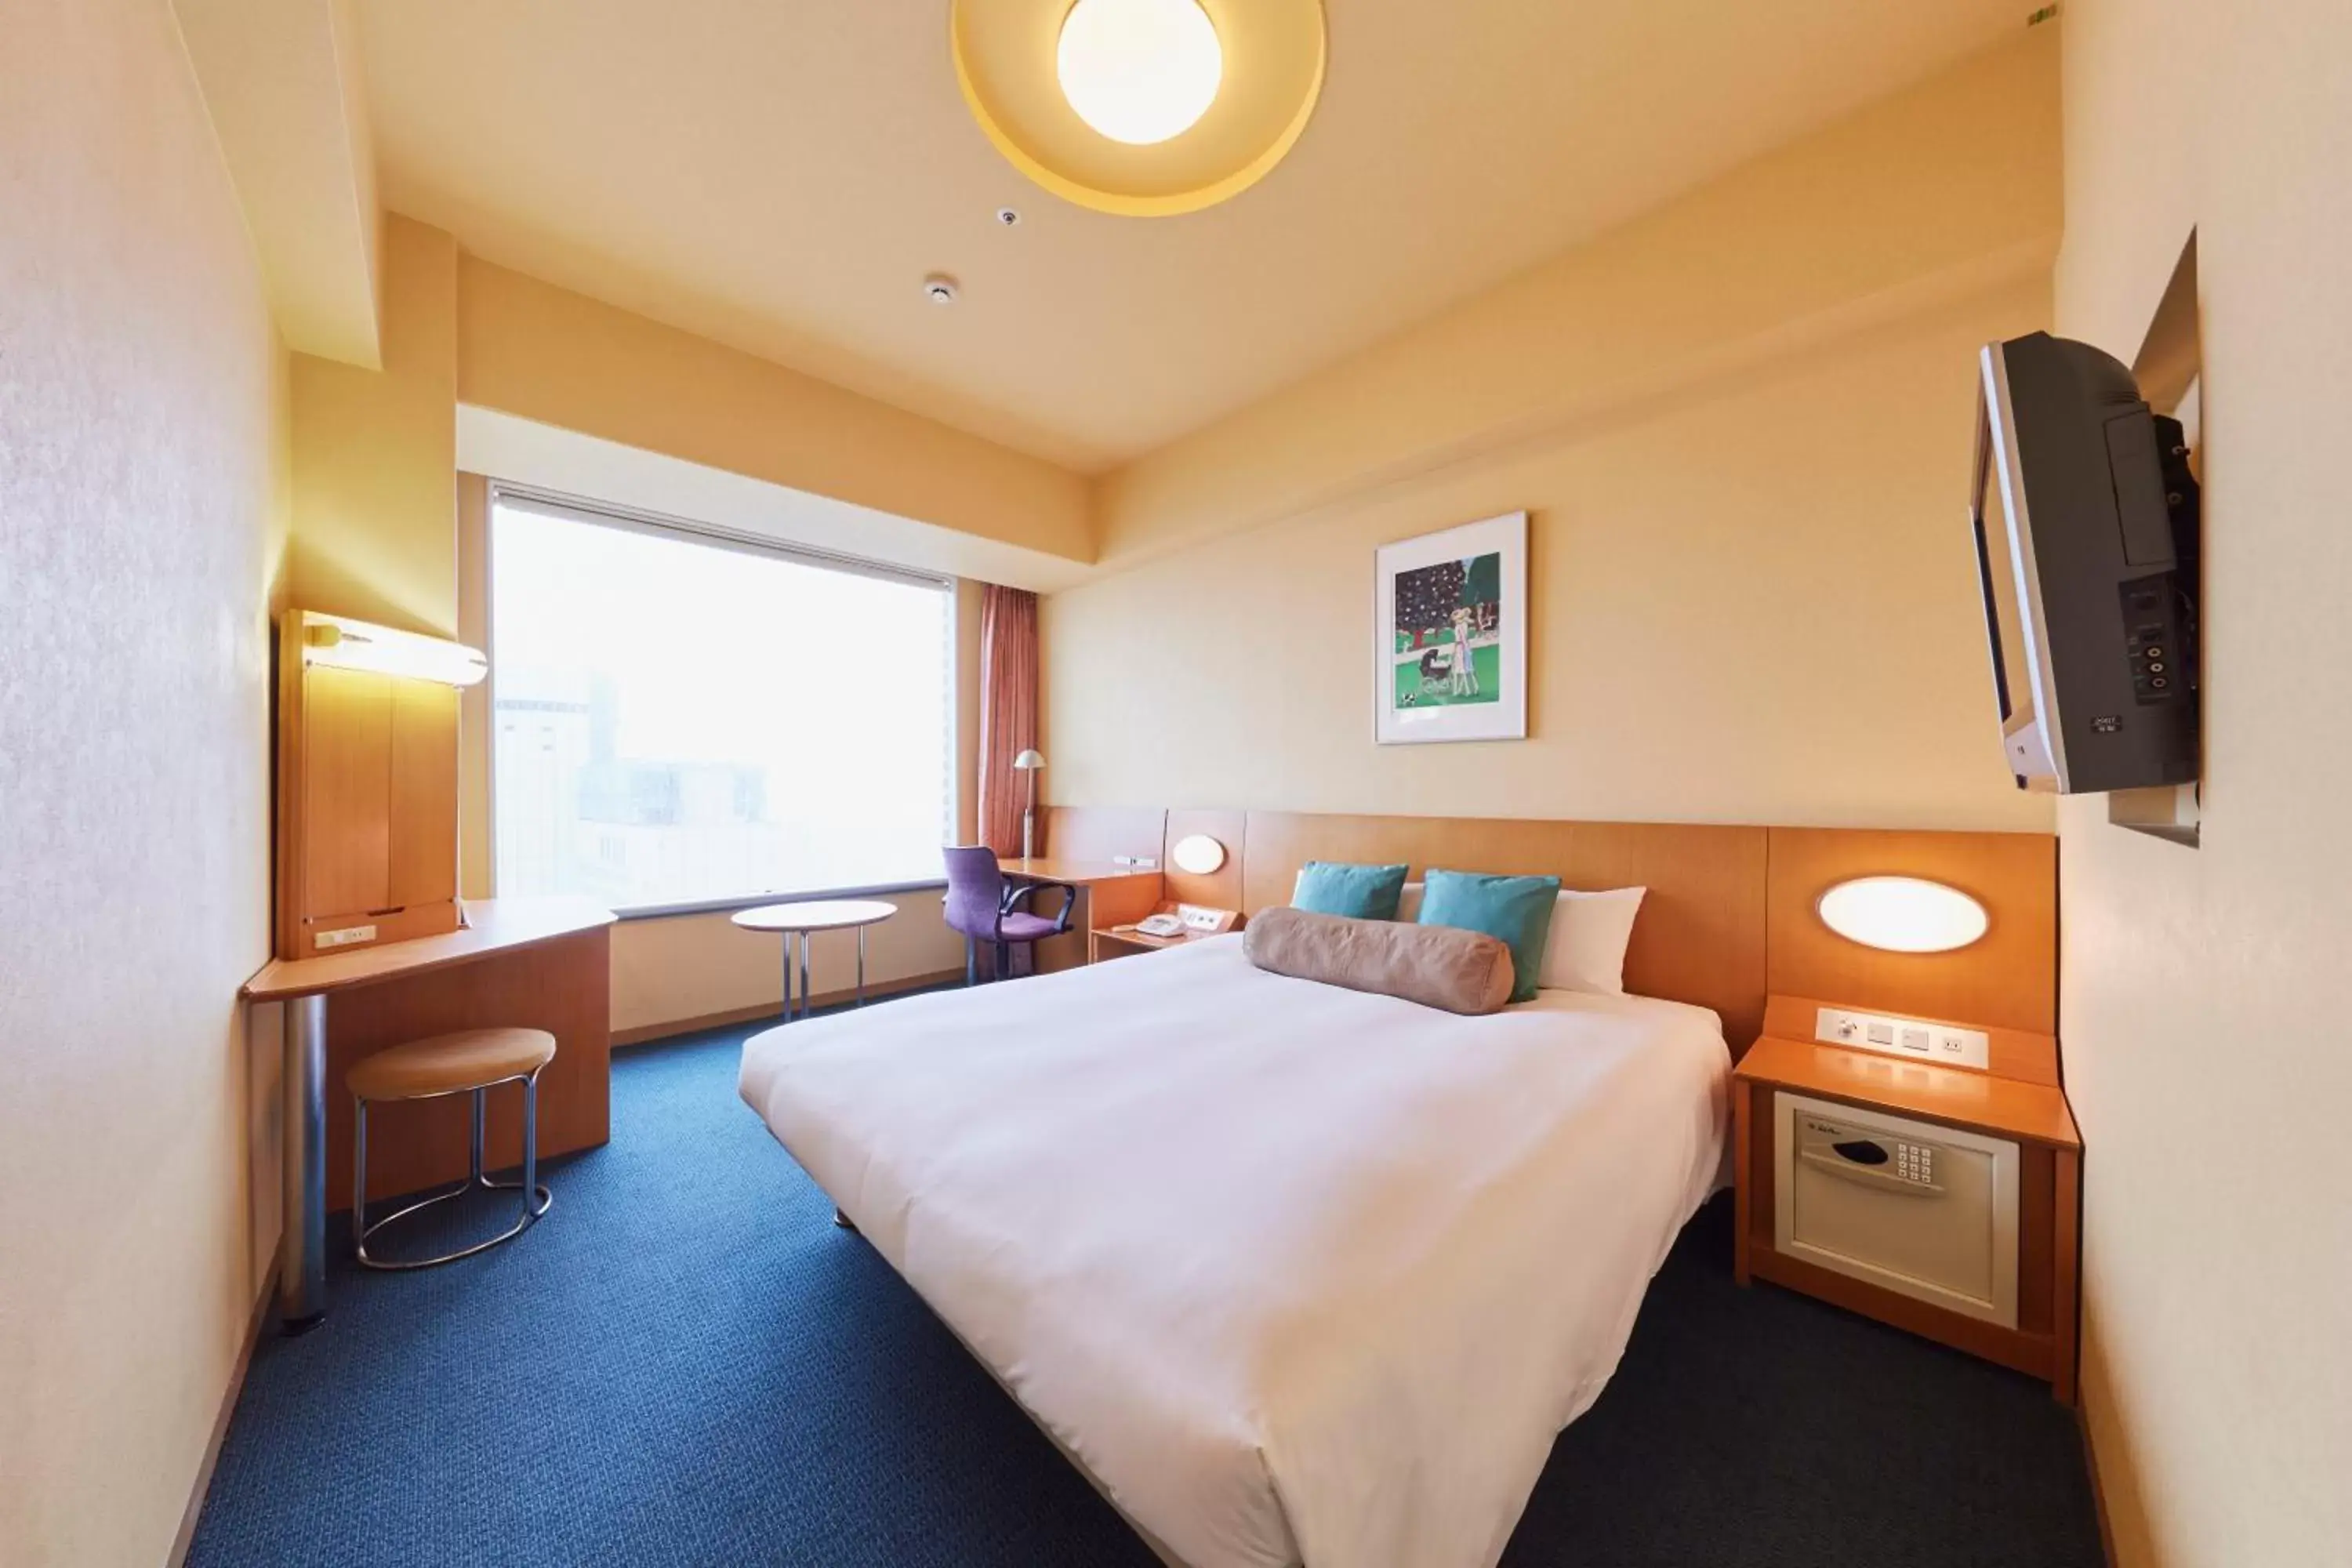 Annex Tower - single occupancy - Double Room - Non-Smoking 21st-29th Floor  in Shinagawa Prince Hotel